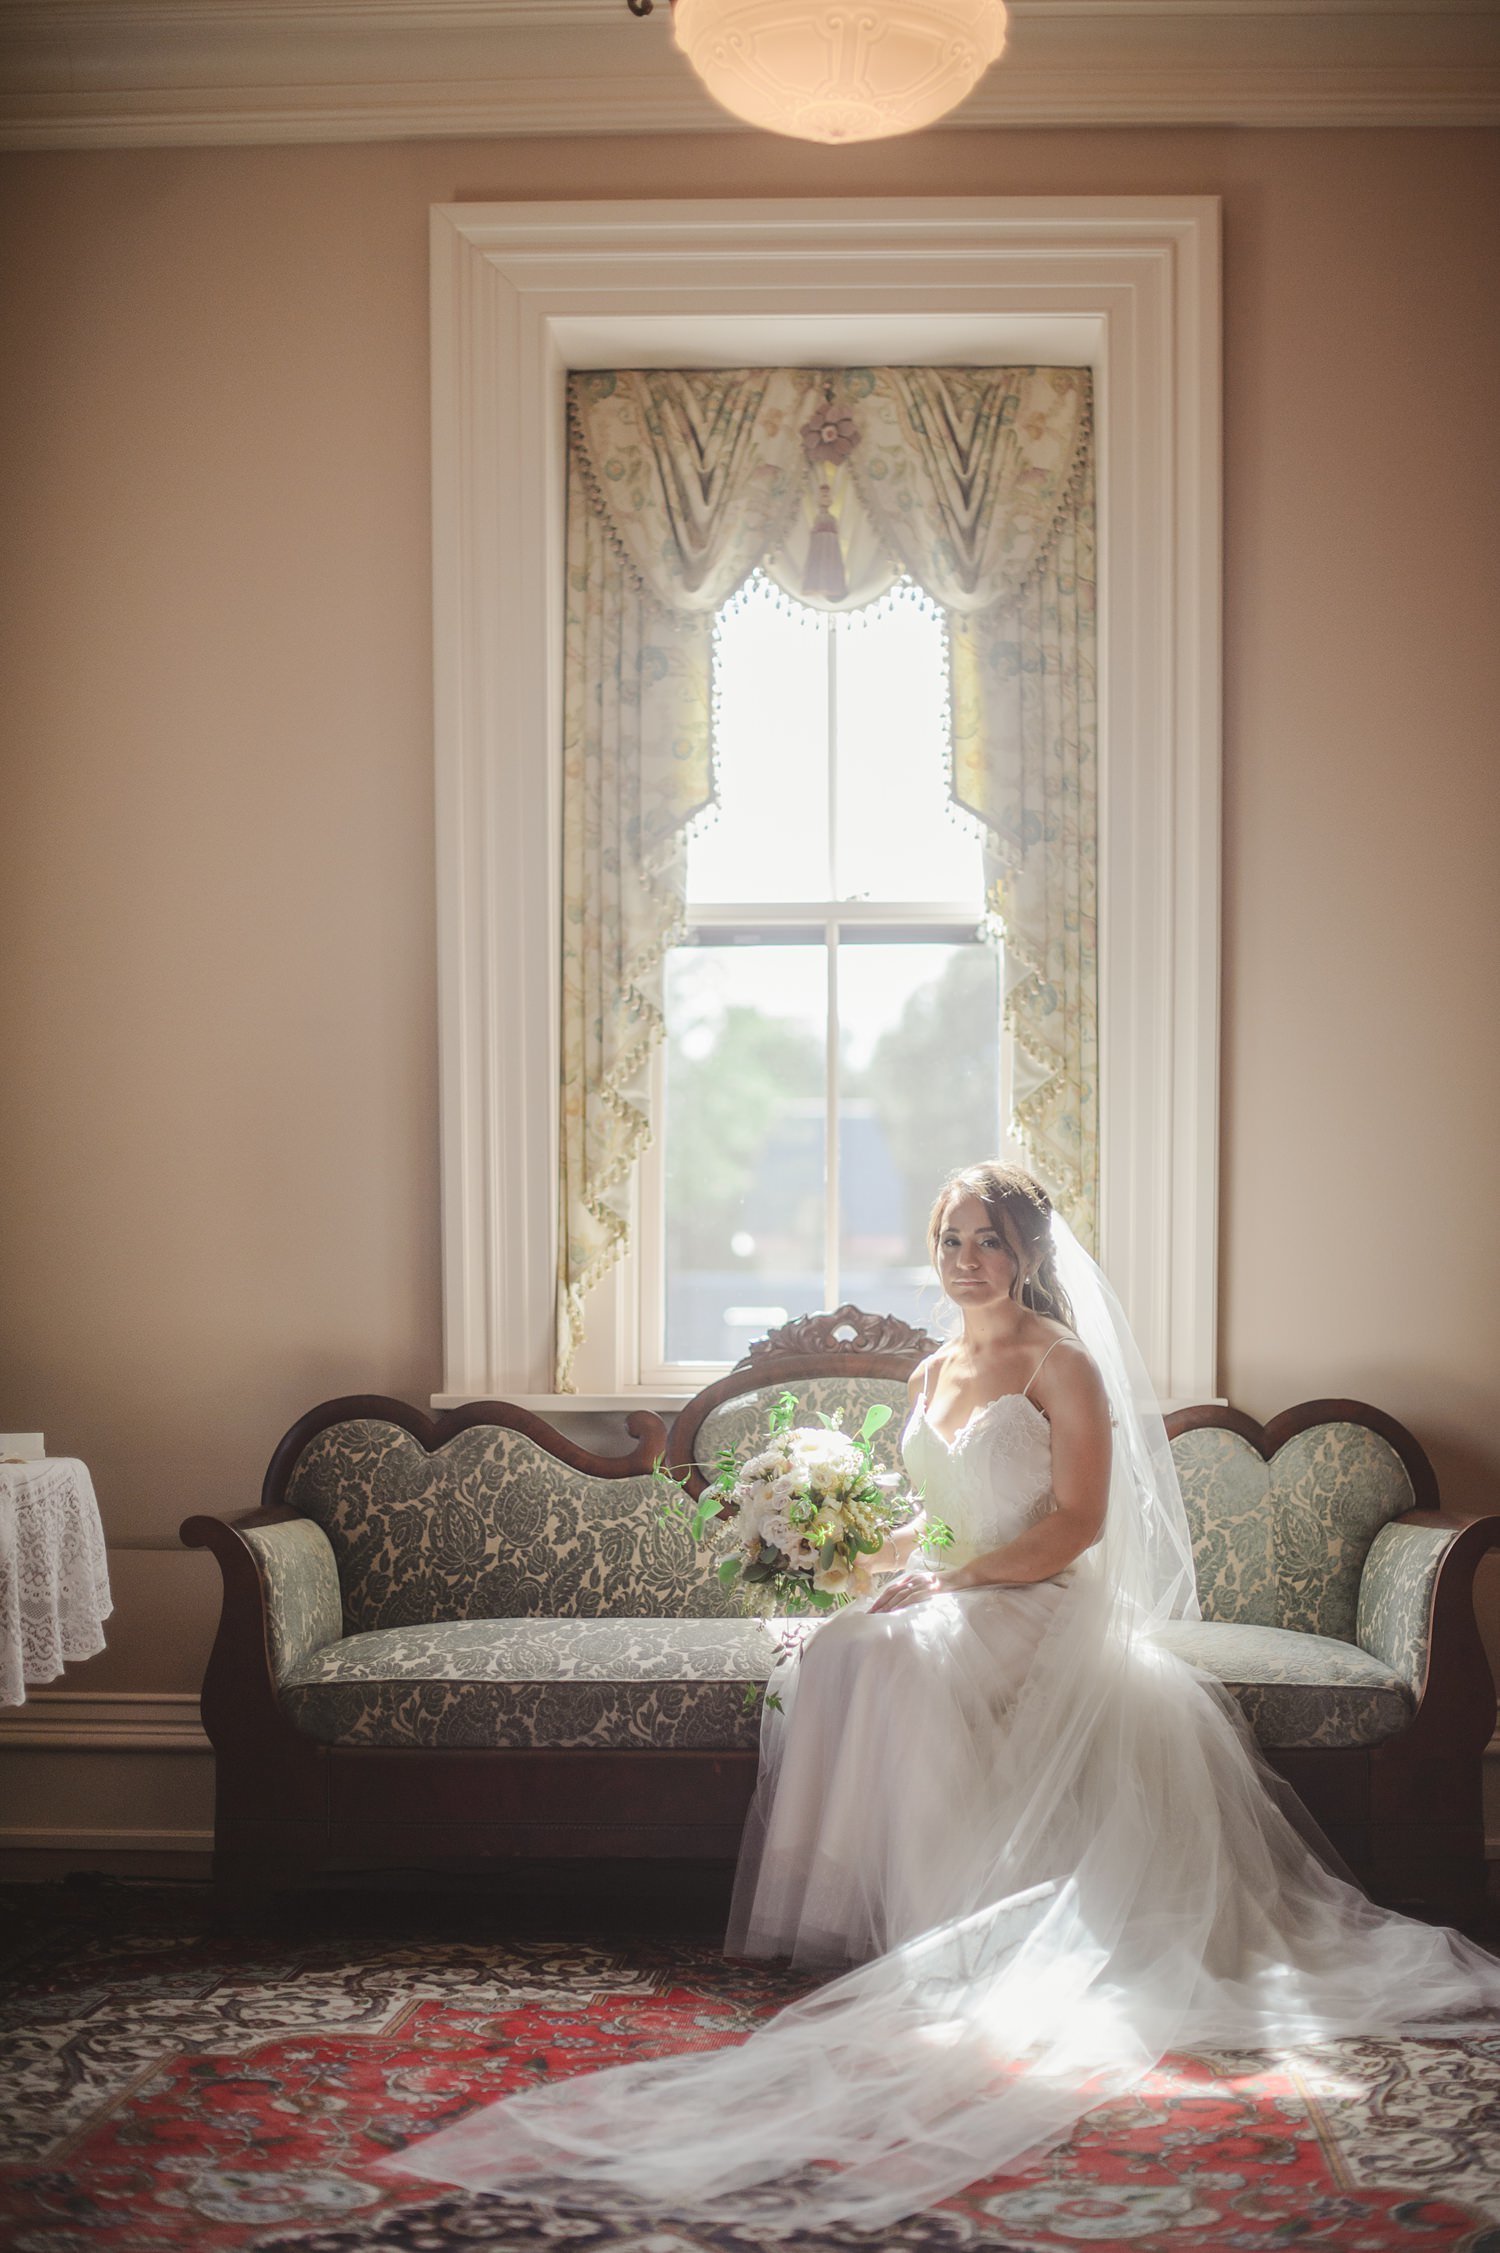 Bride next to window on vintage sofa at The Webb Barn in Wethersfiled, CT